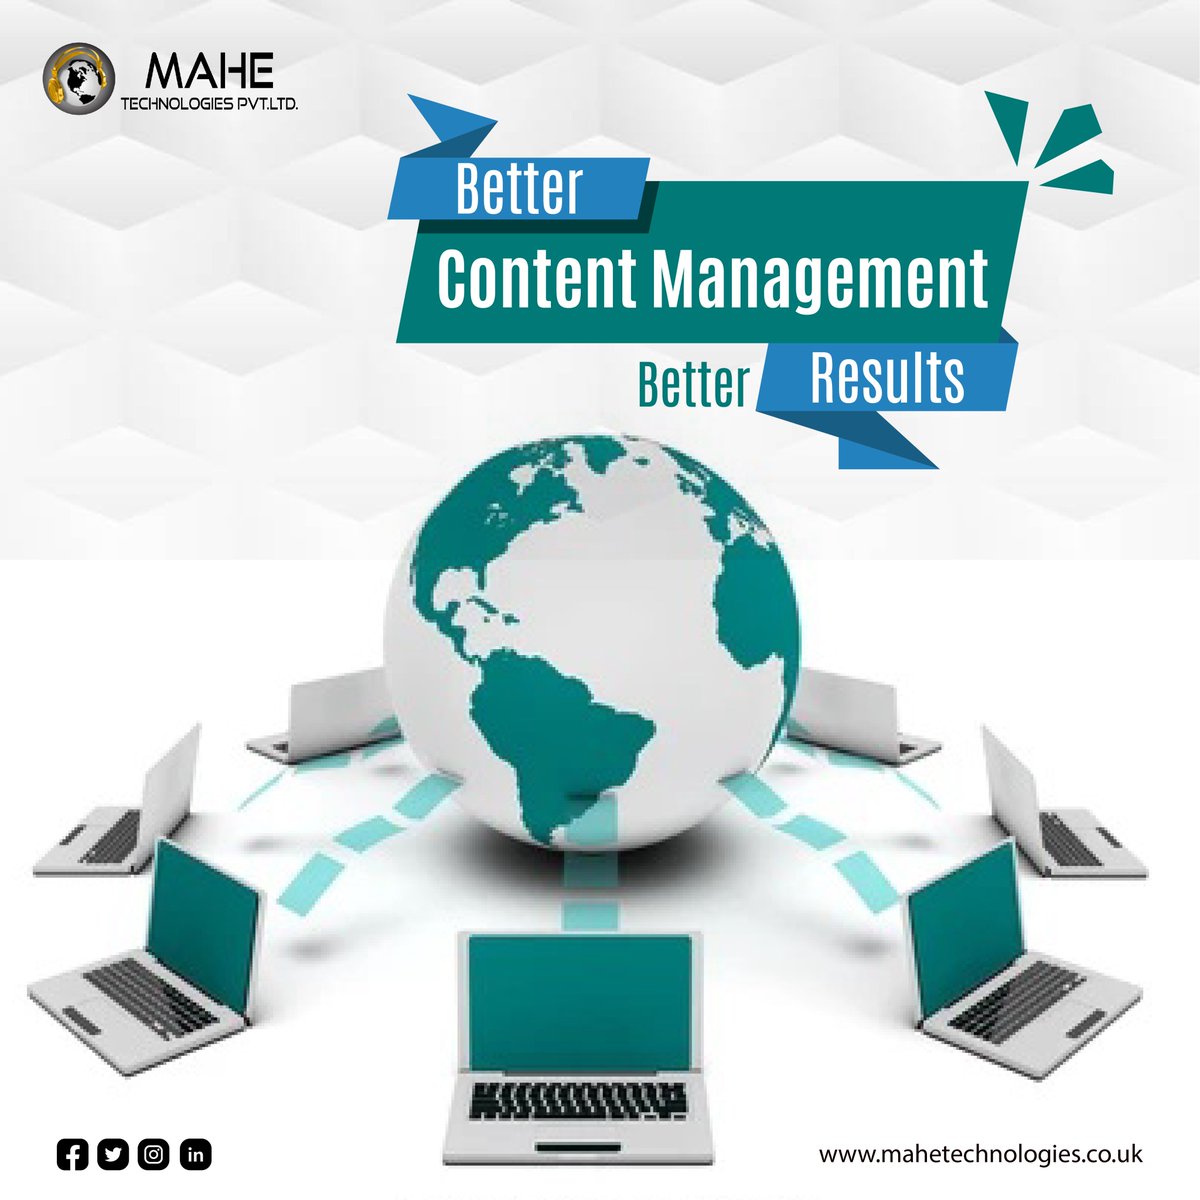 We offer you a cost-effective content management system that allows you the flexibility to create, publish, distribute and manage your website as per your convenience.
.
Visit Us - mahetechnologies.co.uk
.
#contentmanagementsystem #cms #website #webdesign #seo #websitedesign